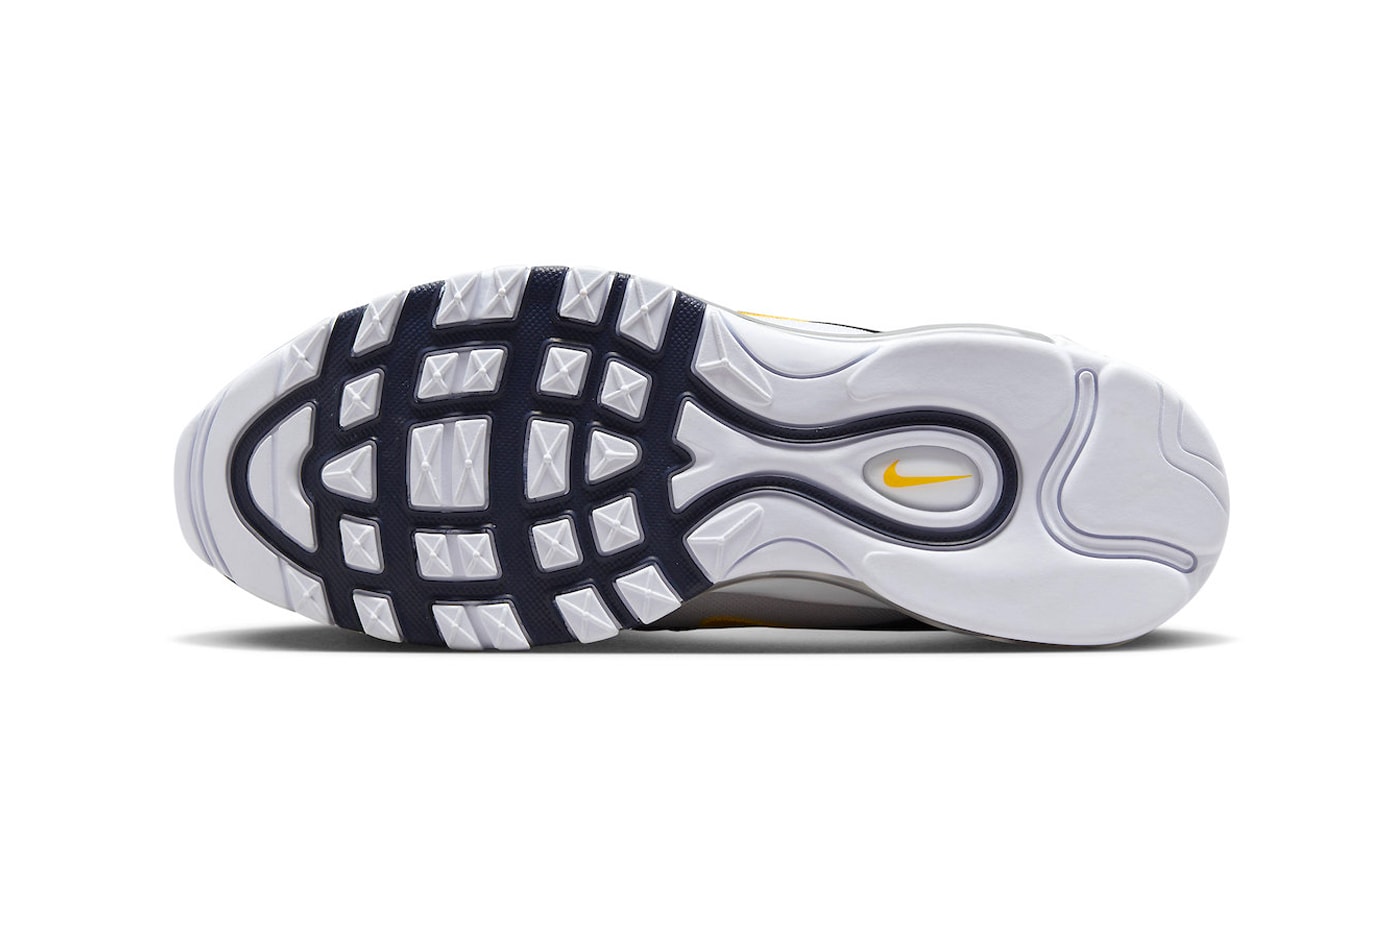 Official Look at the Nike Air Max 97 "Michigan" 921826-110 release info sneakers wardrobe staples white navy